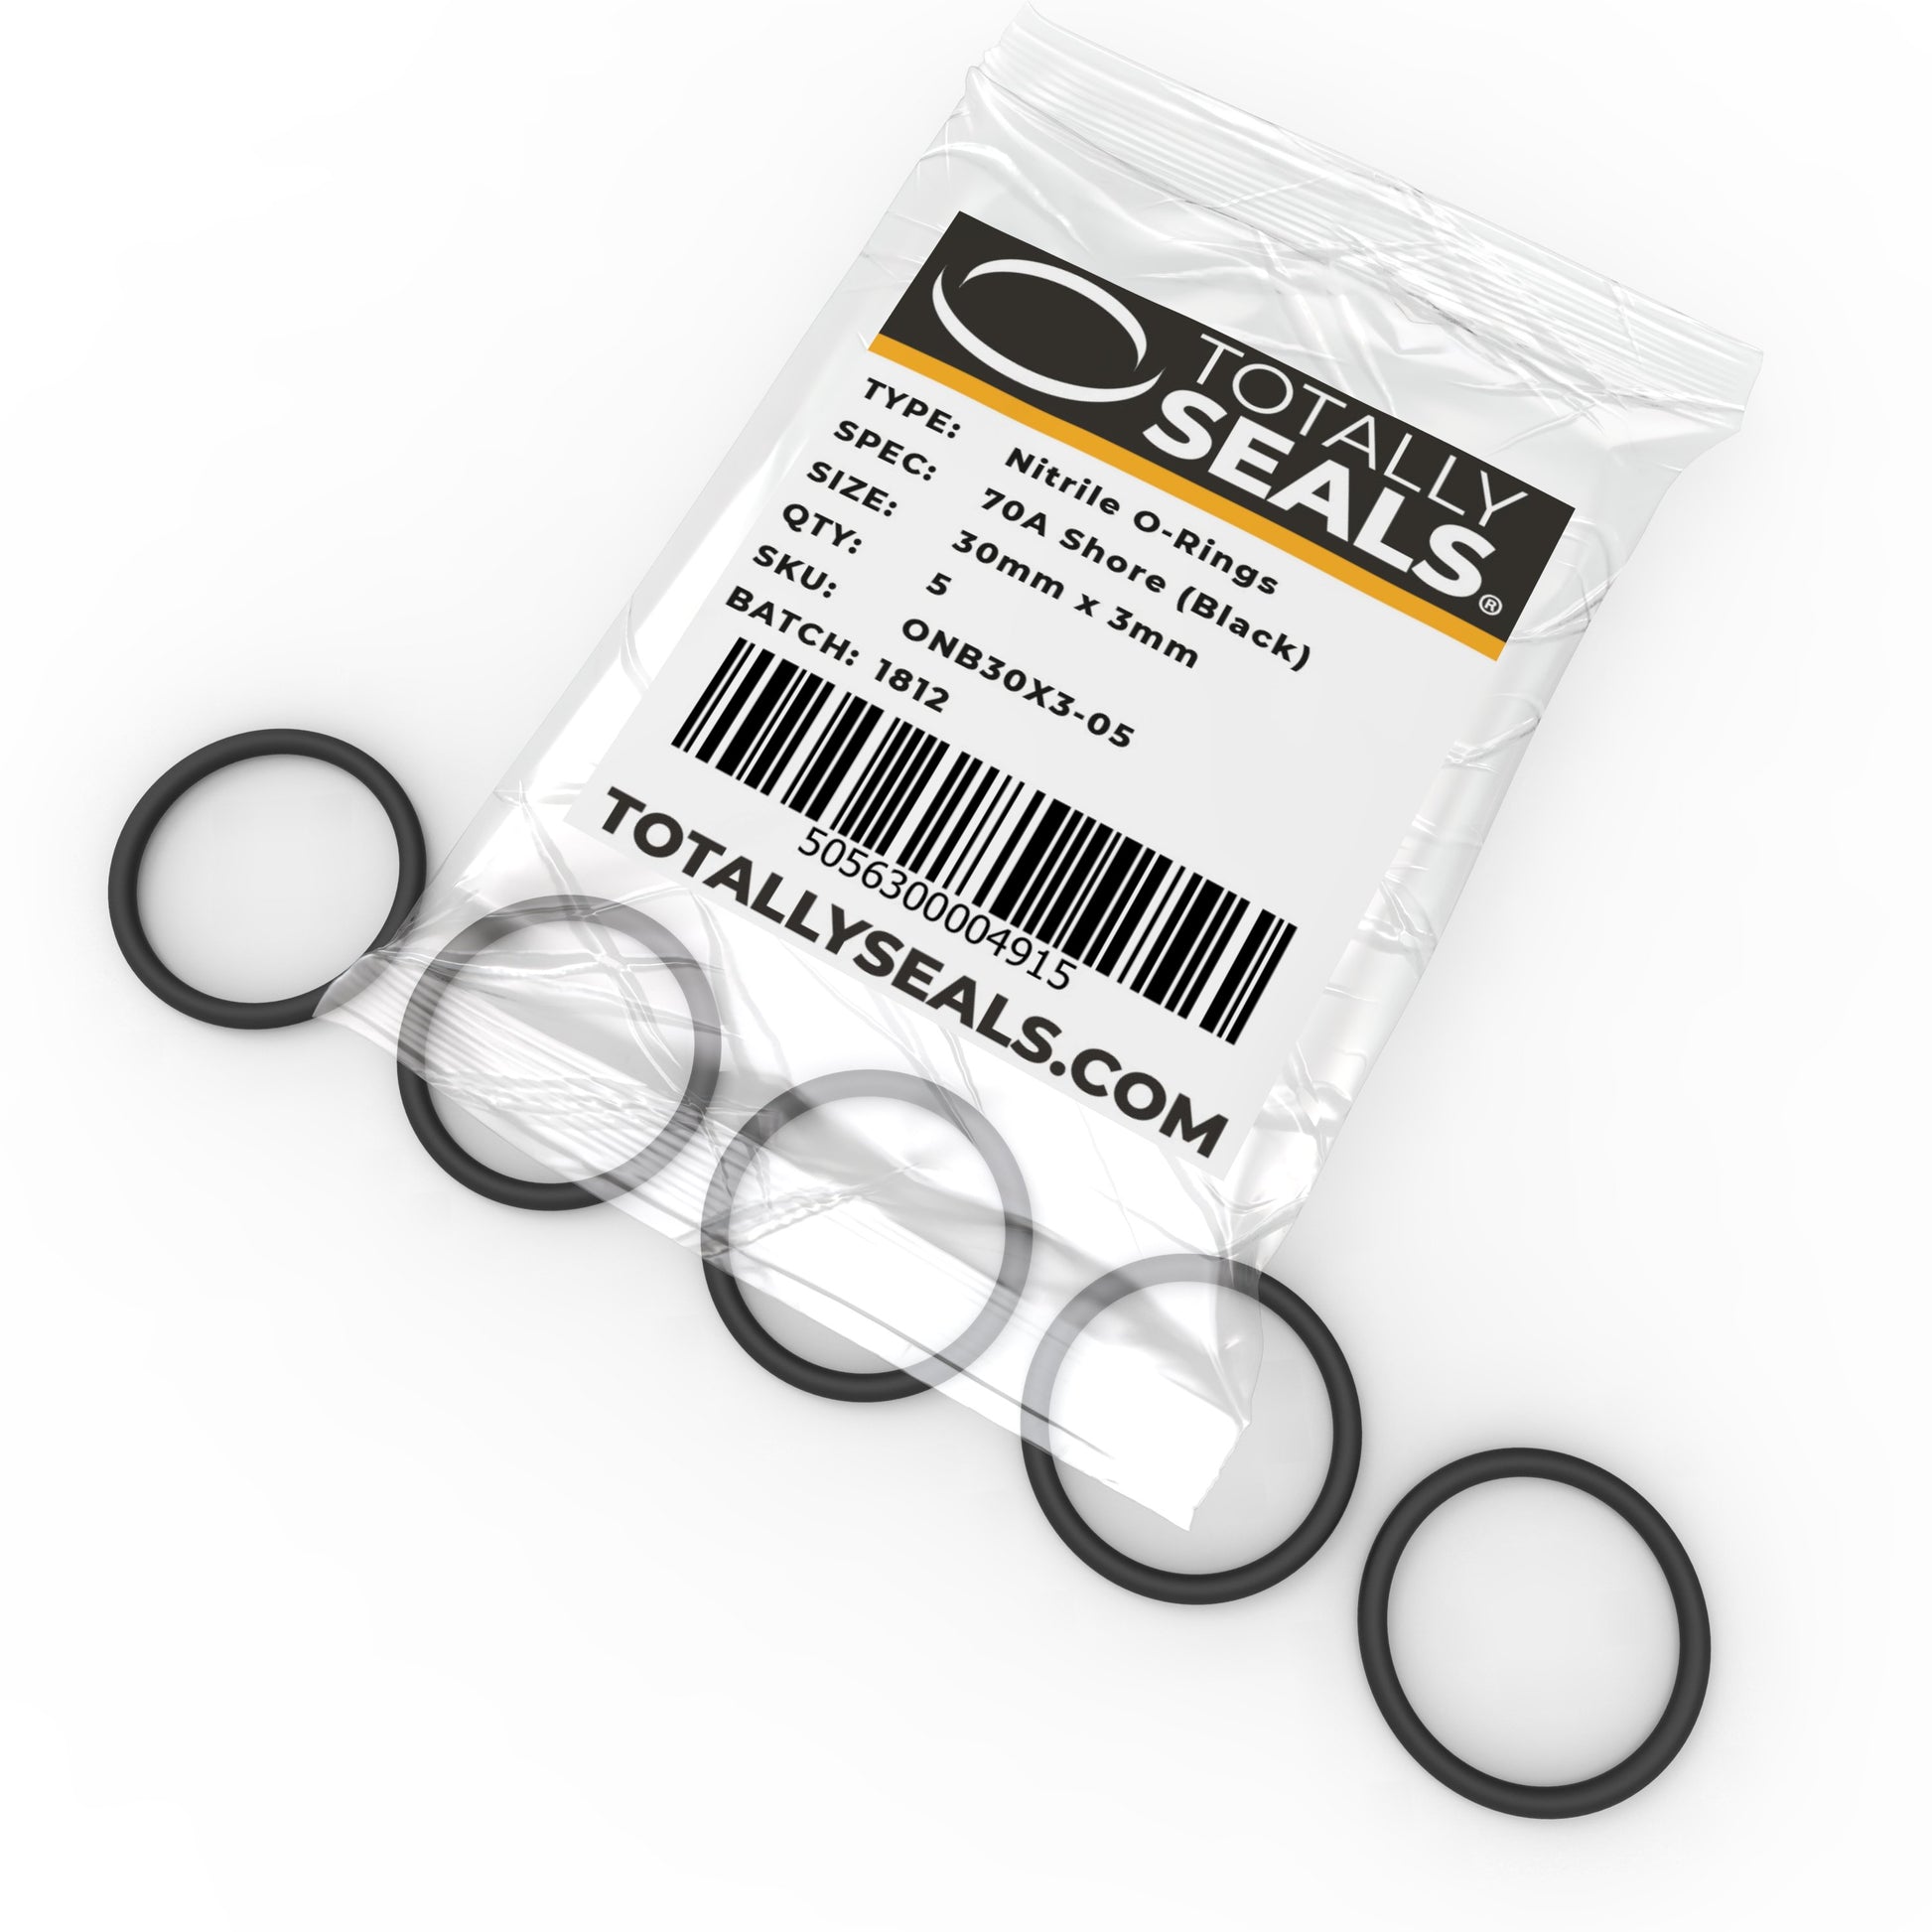 30mm x 3mm (36mm OD) Nitrile O-Rings - Totally Seals®